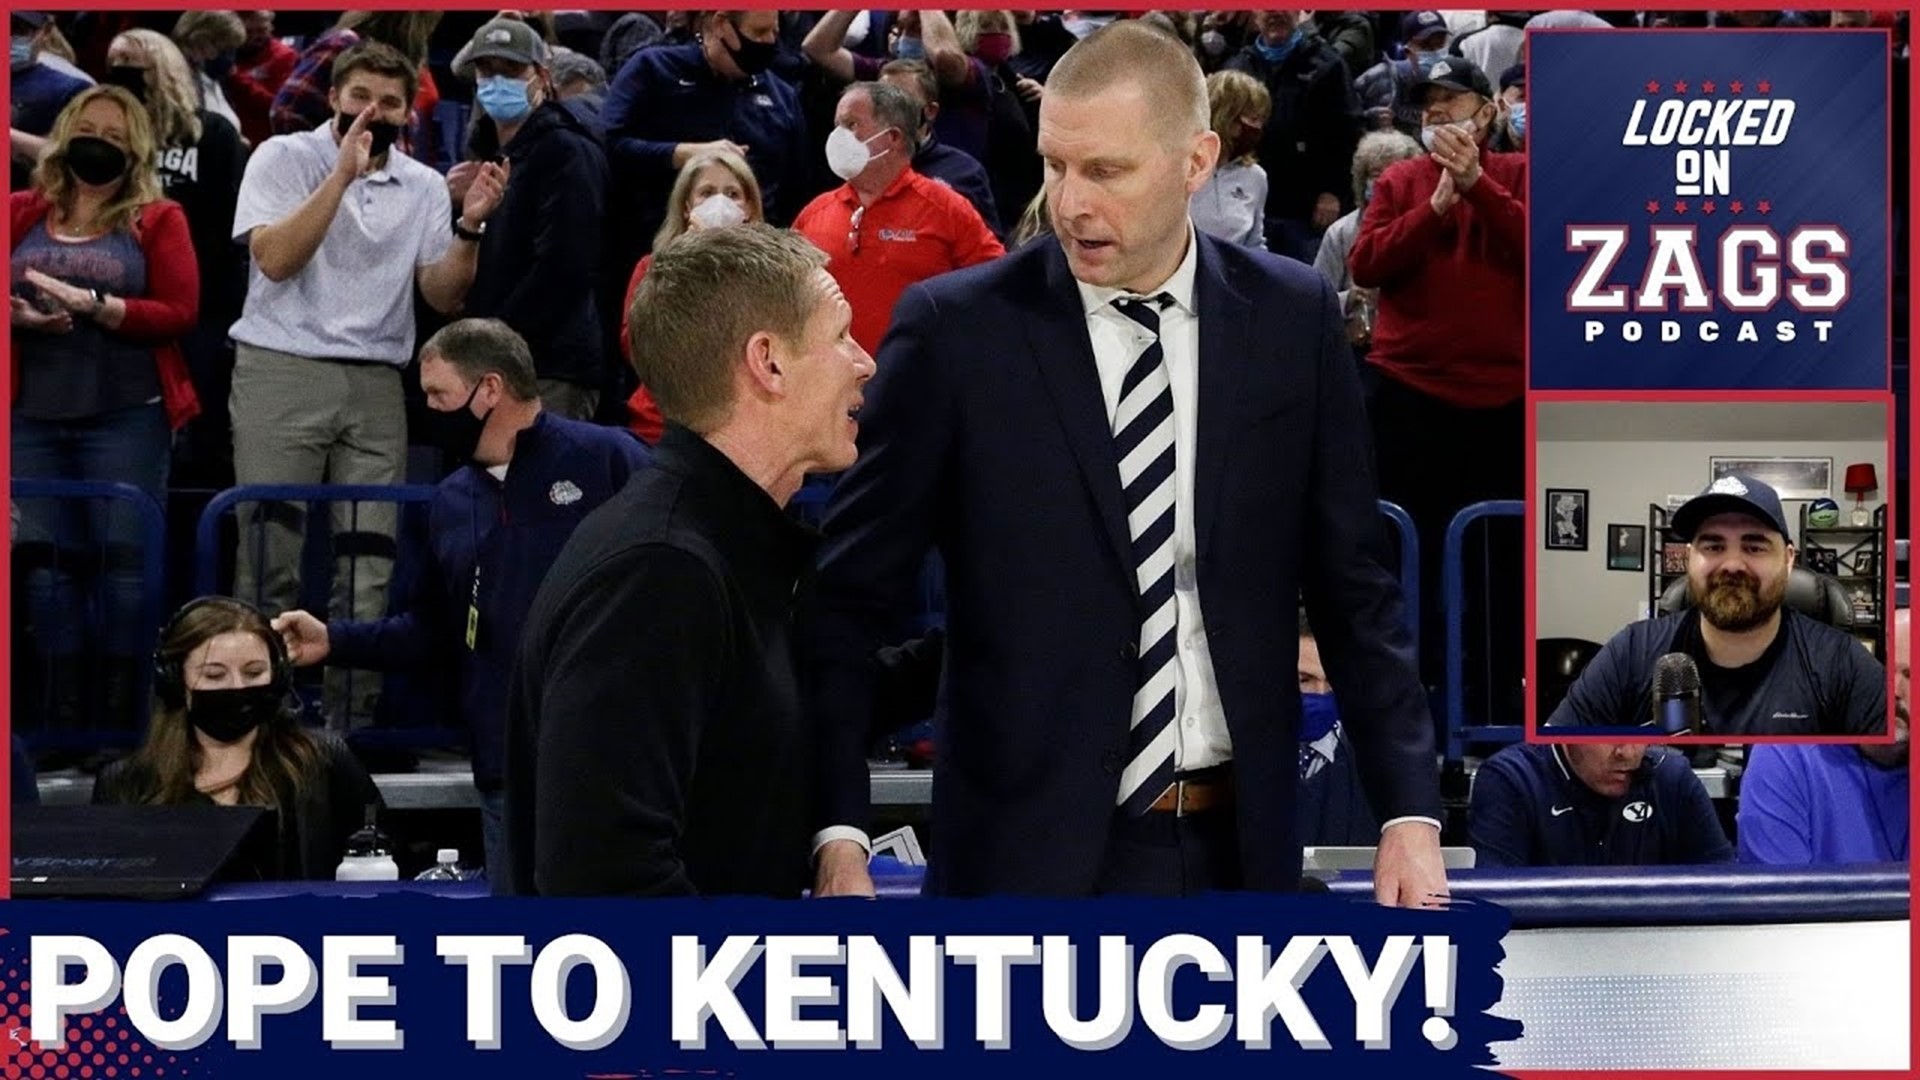 Mark Few and the Gonzaga Bulldogs have four games remaining in a six-game scheduling series against the Kentucky Wildcats.